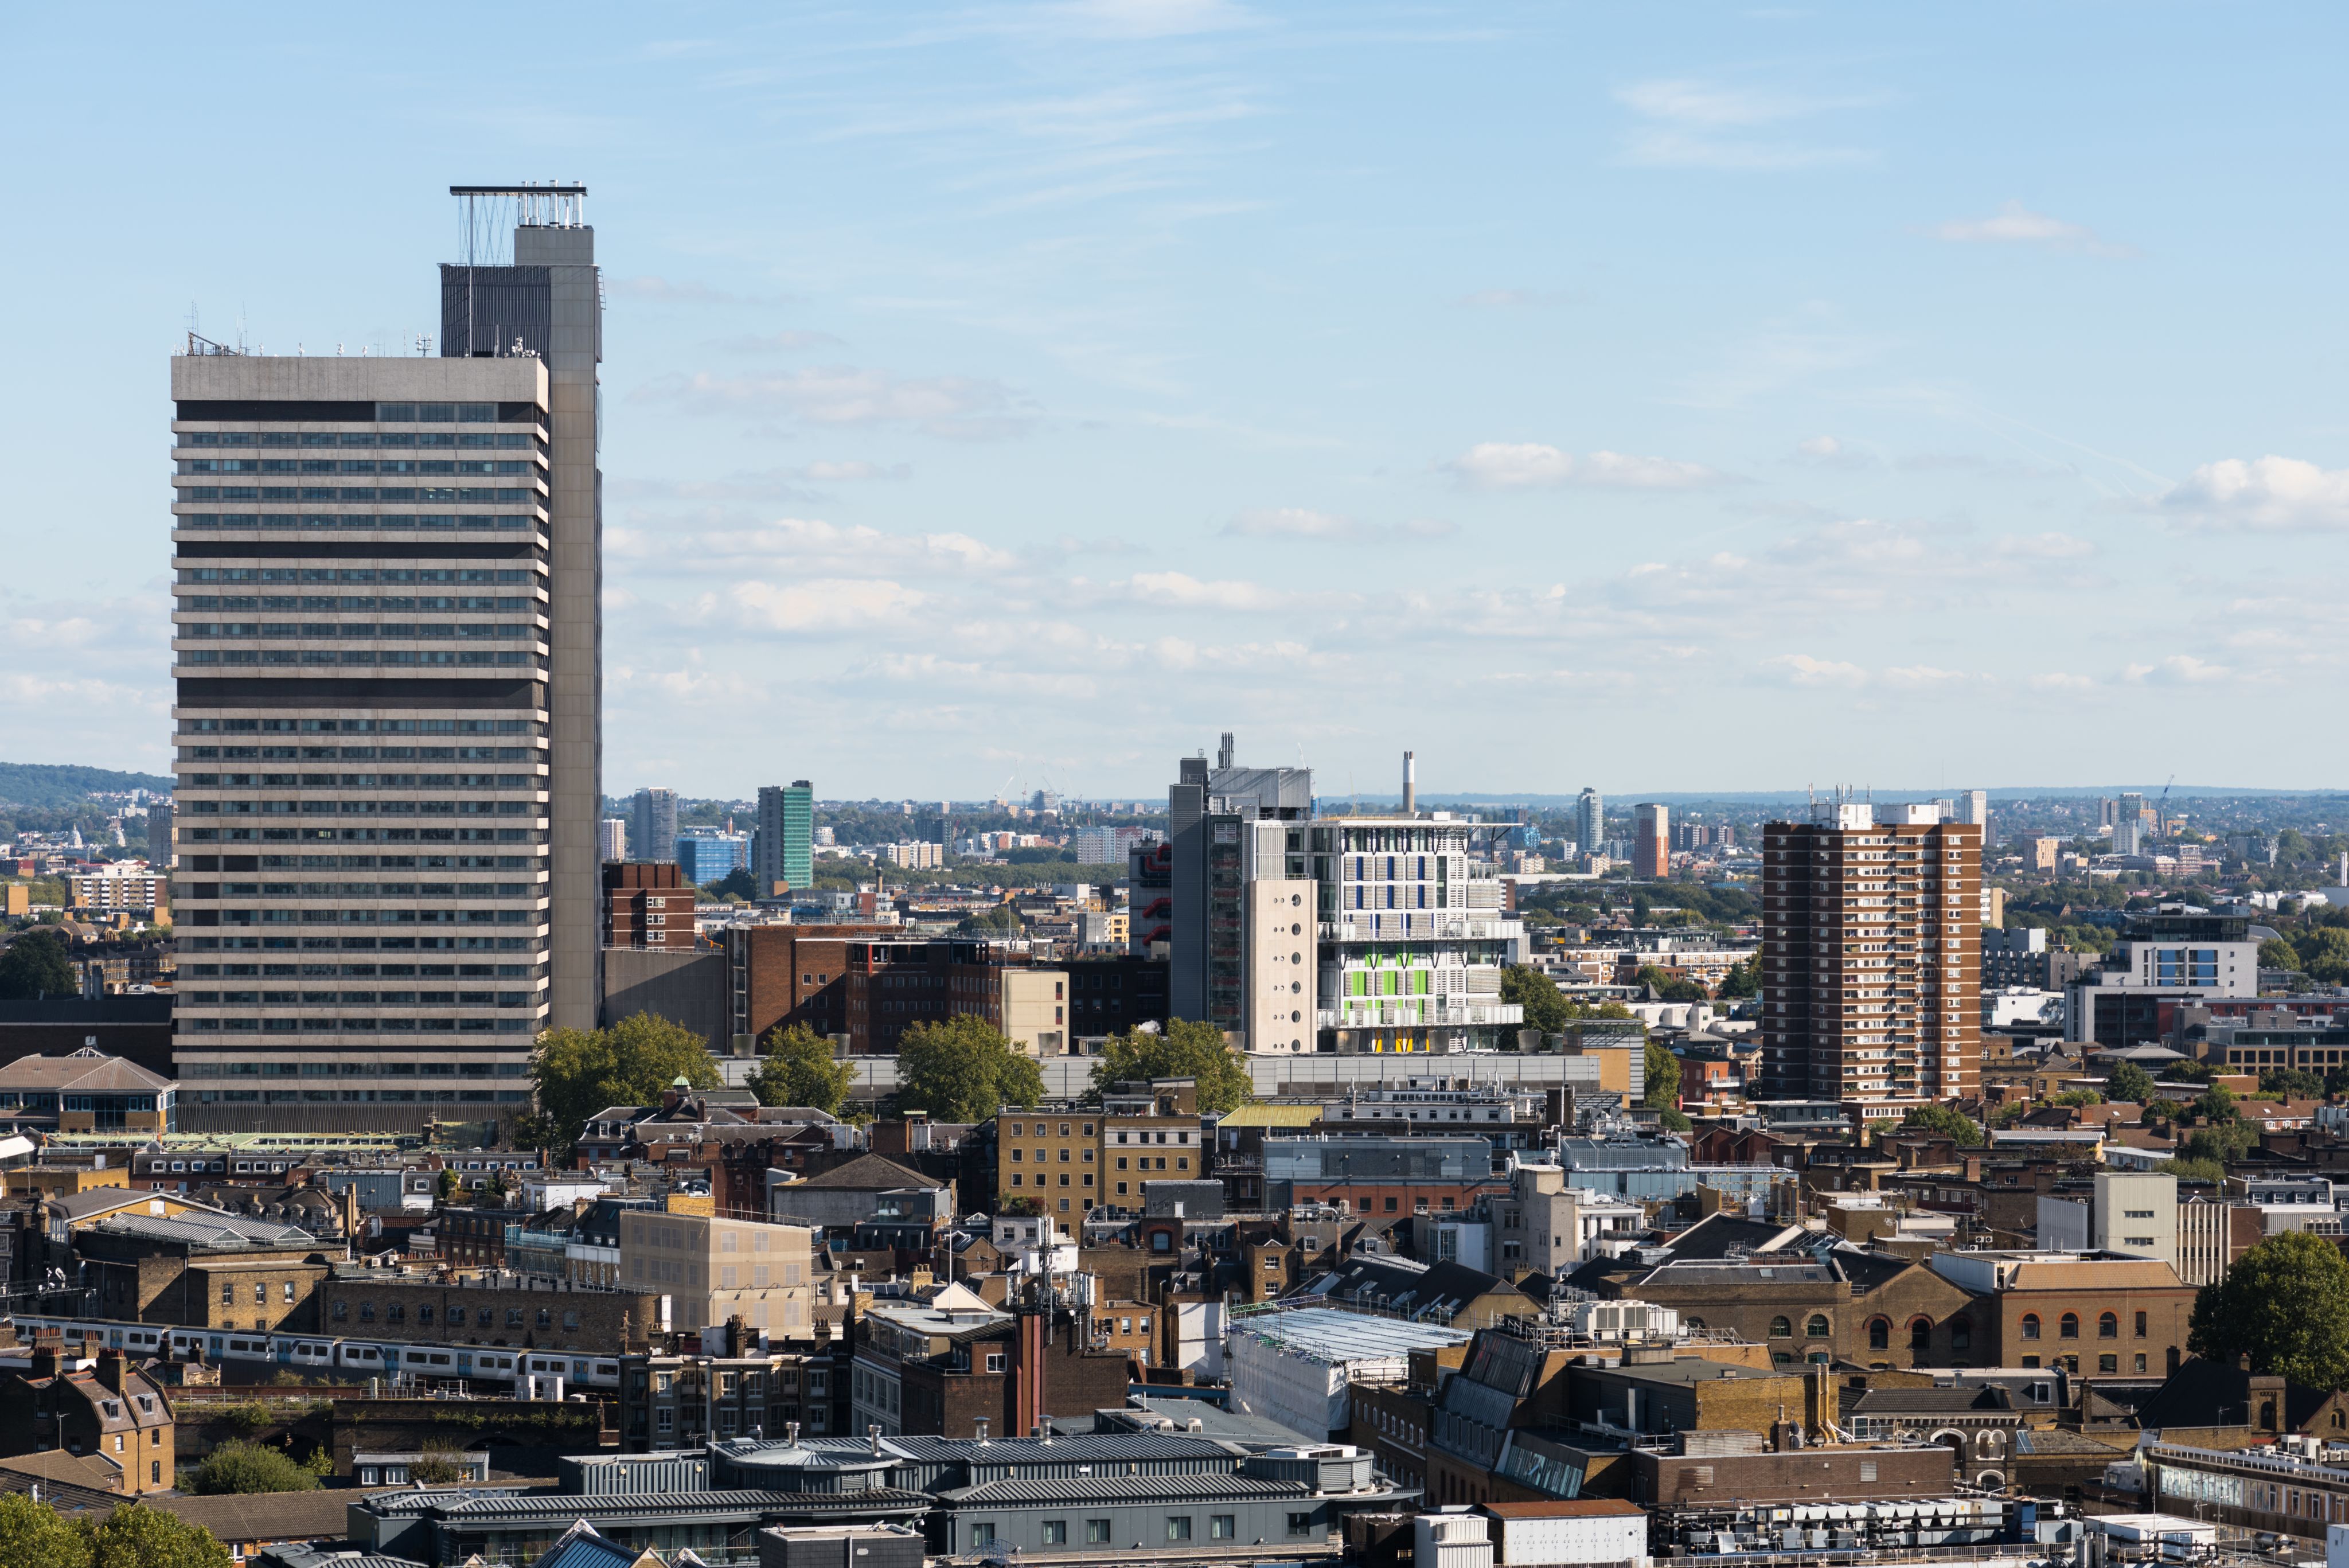 Rooftop view across Southwark, including Guy's Hospital, London.